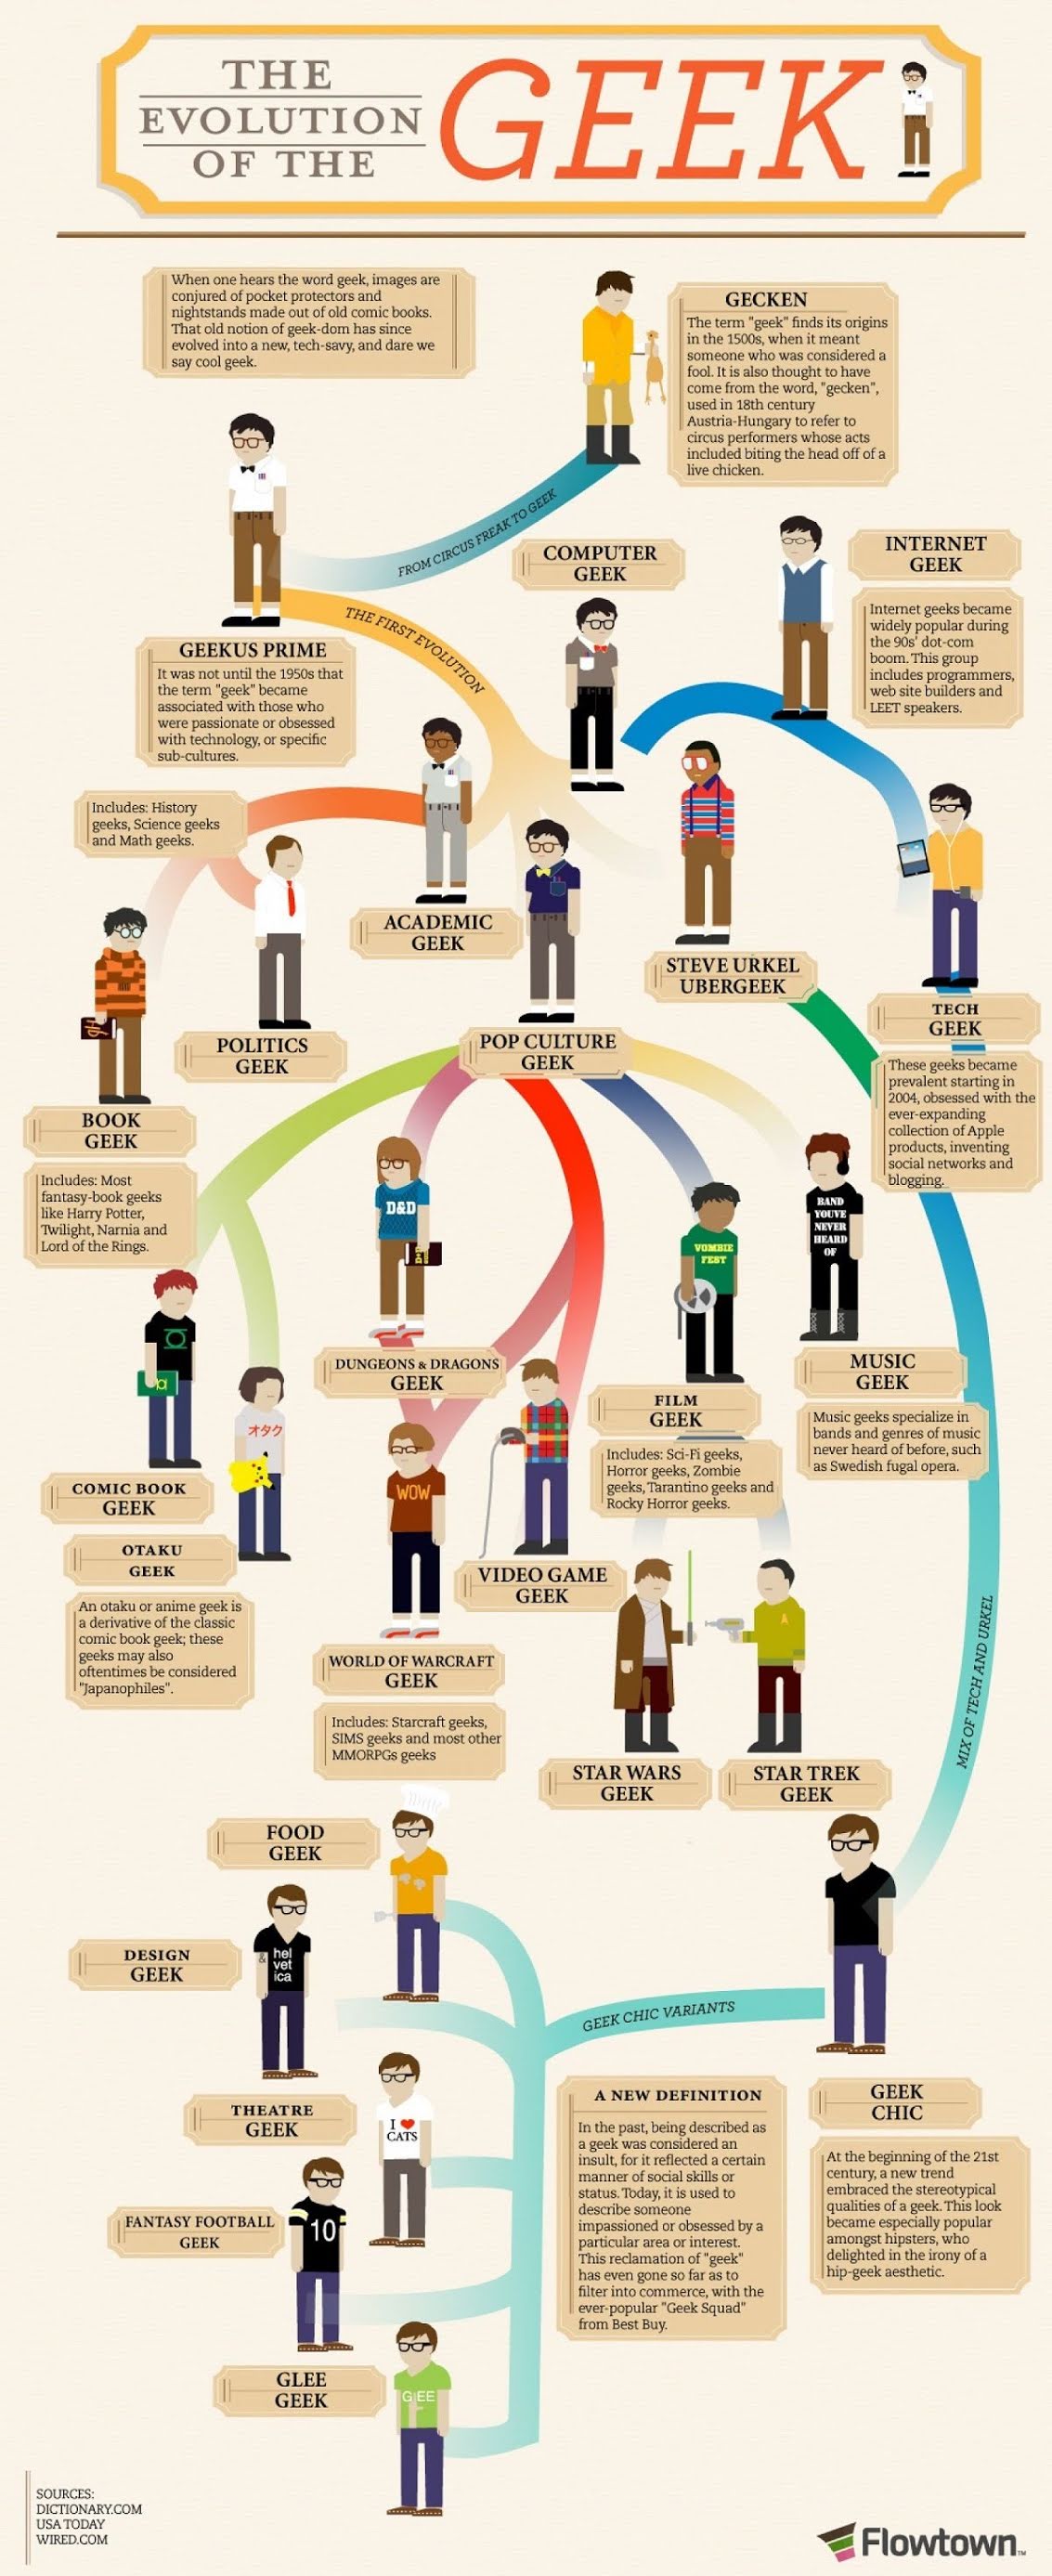 The Evolution of the Geek #infographic